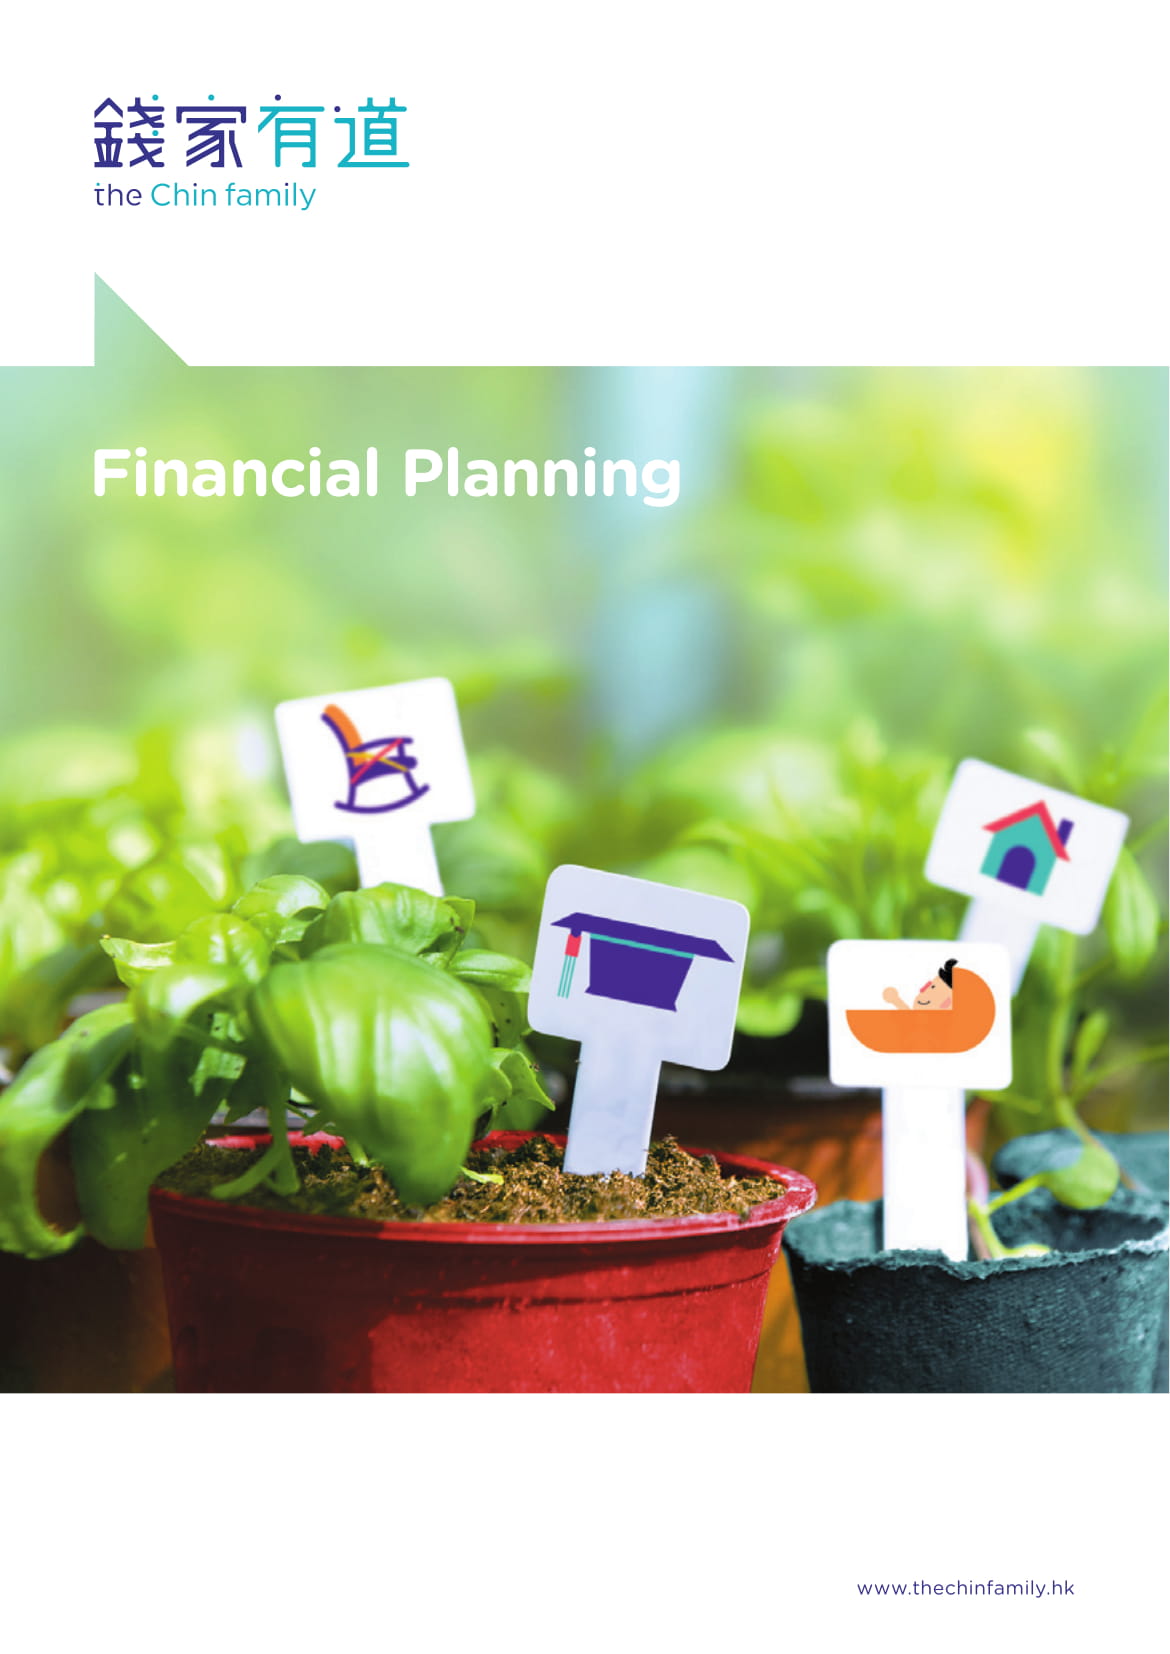 iec financial planning booklet